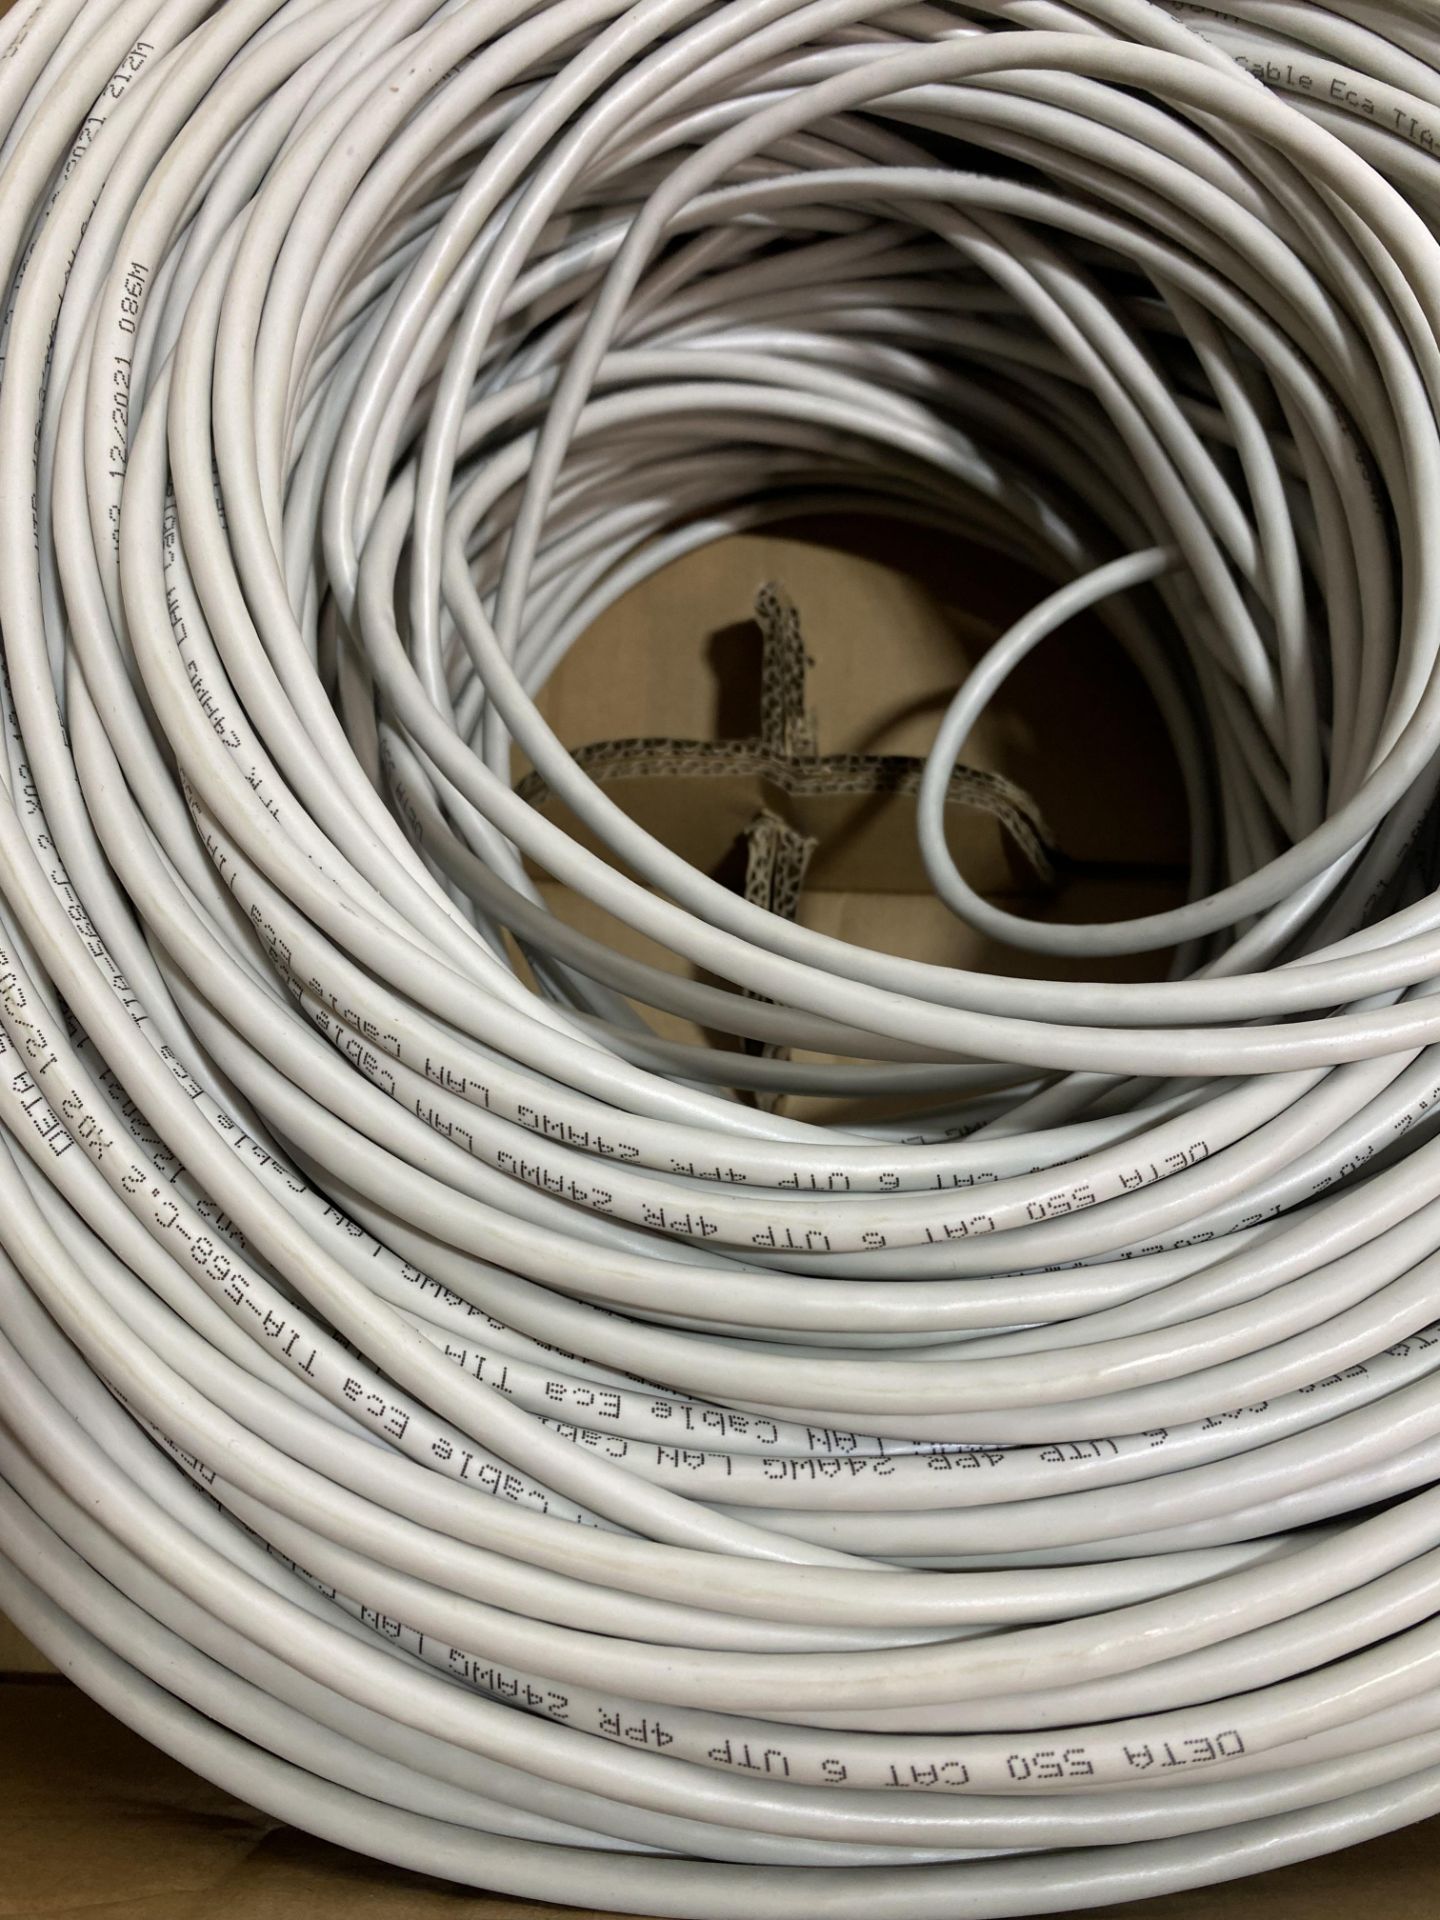 Deta 550 Cat 6 Solid UTP 24AWG Data Cable, Grey - 305M - Image 2 of 5